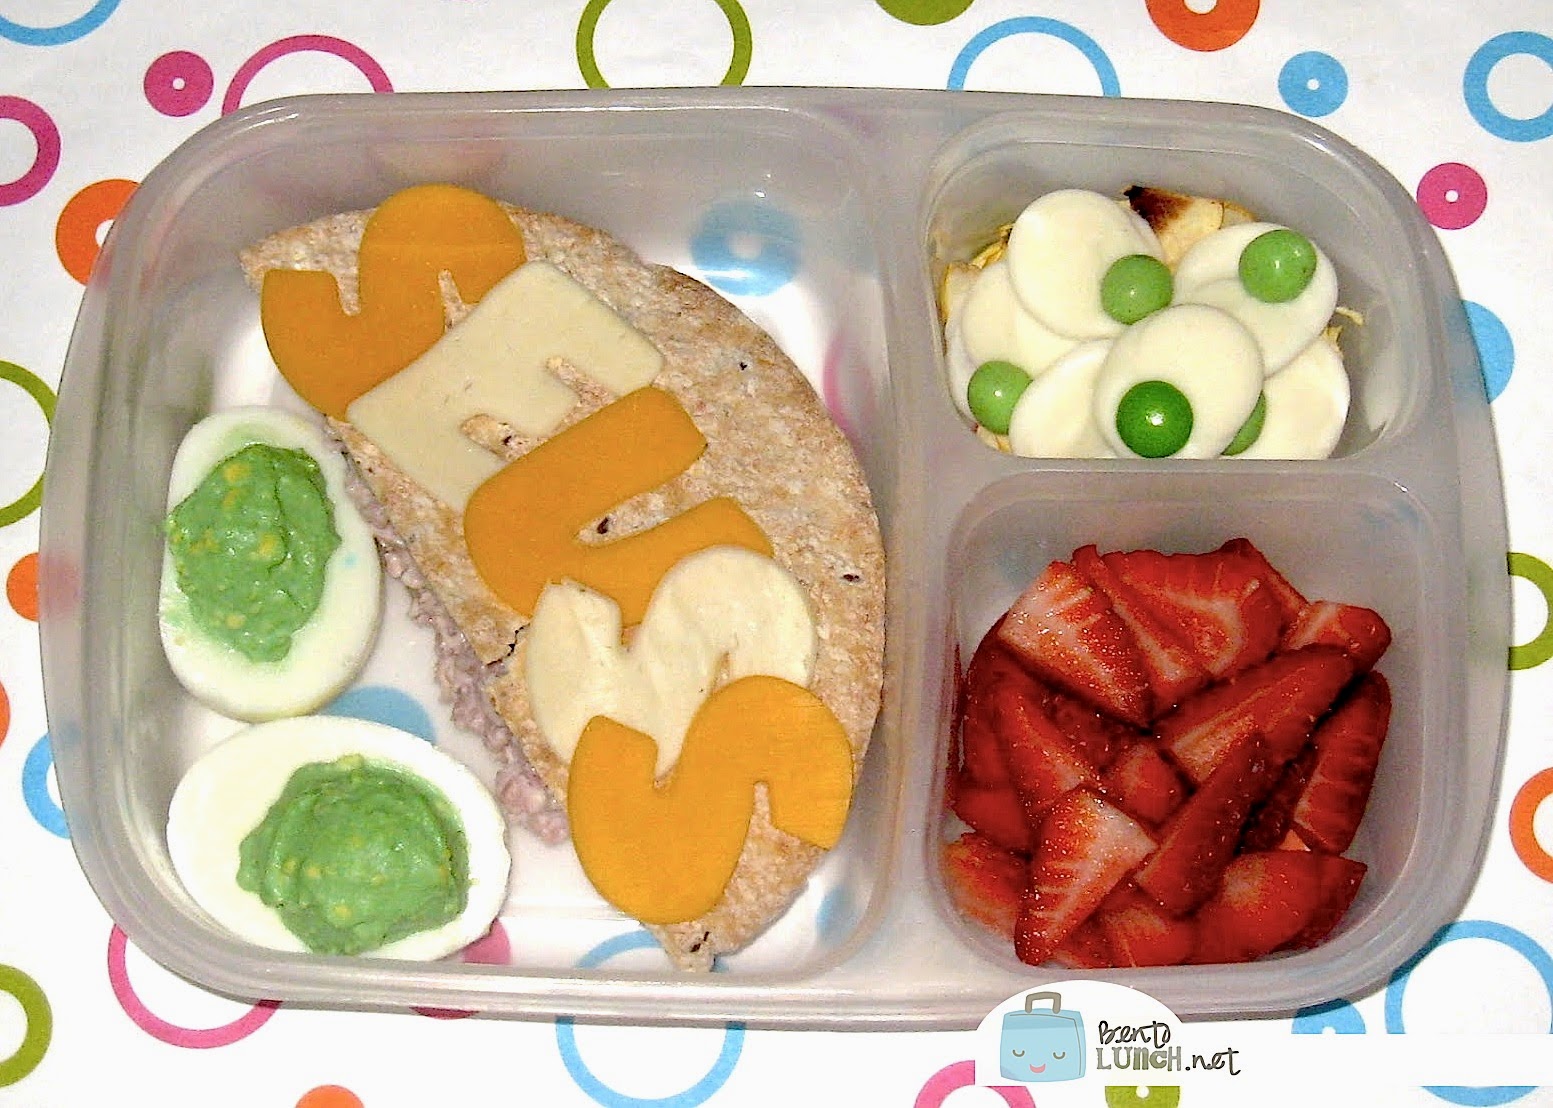 Mamabelly's Lunches With Love: Happy Birthday, Dr. Seuss